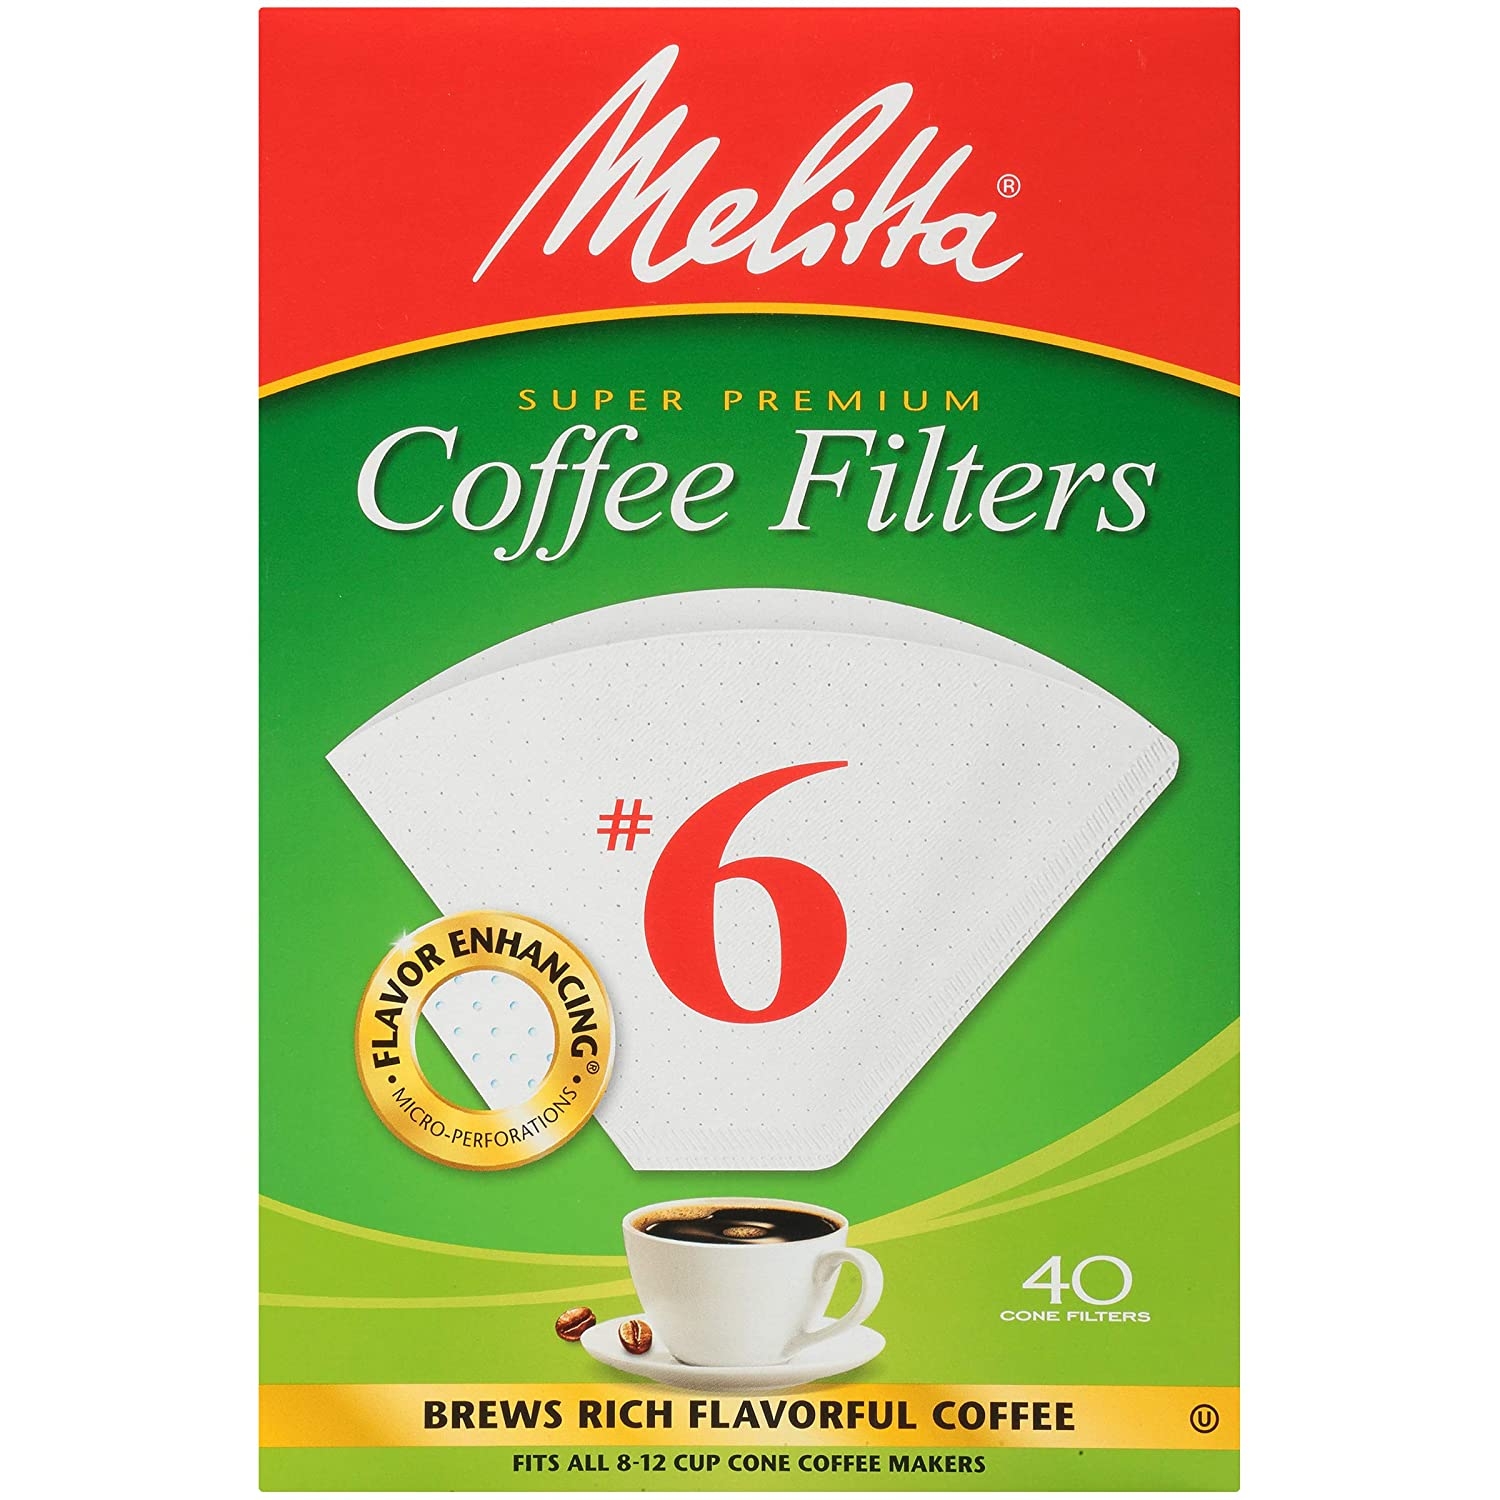 Melitta 6 Cone Coffee Filters, Natural Brown, 40 Count (Pack of 12) 480 Total Filters Import To Shop ×Product customization